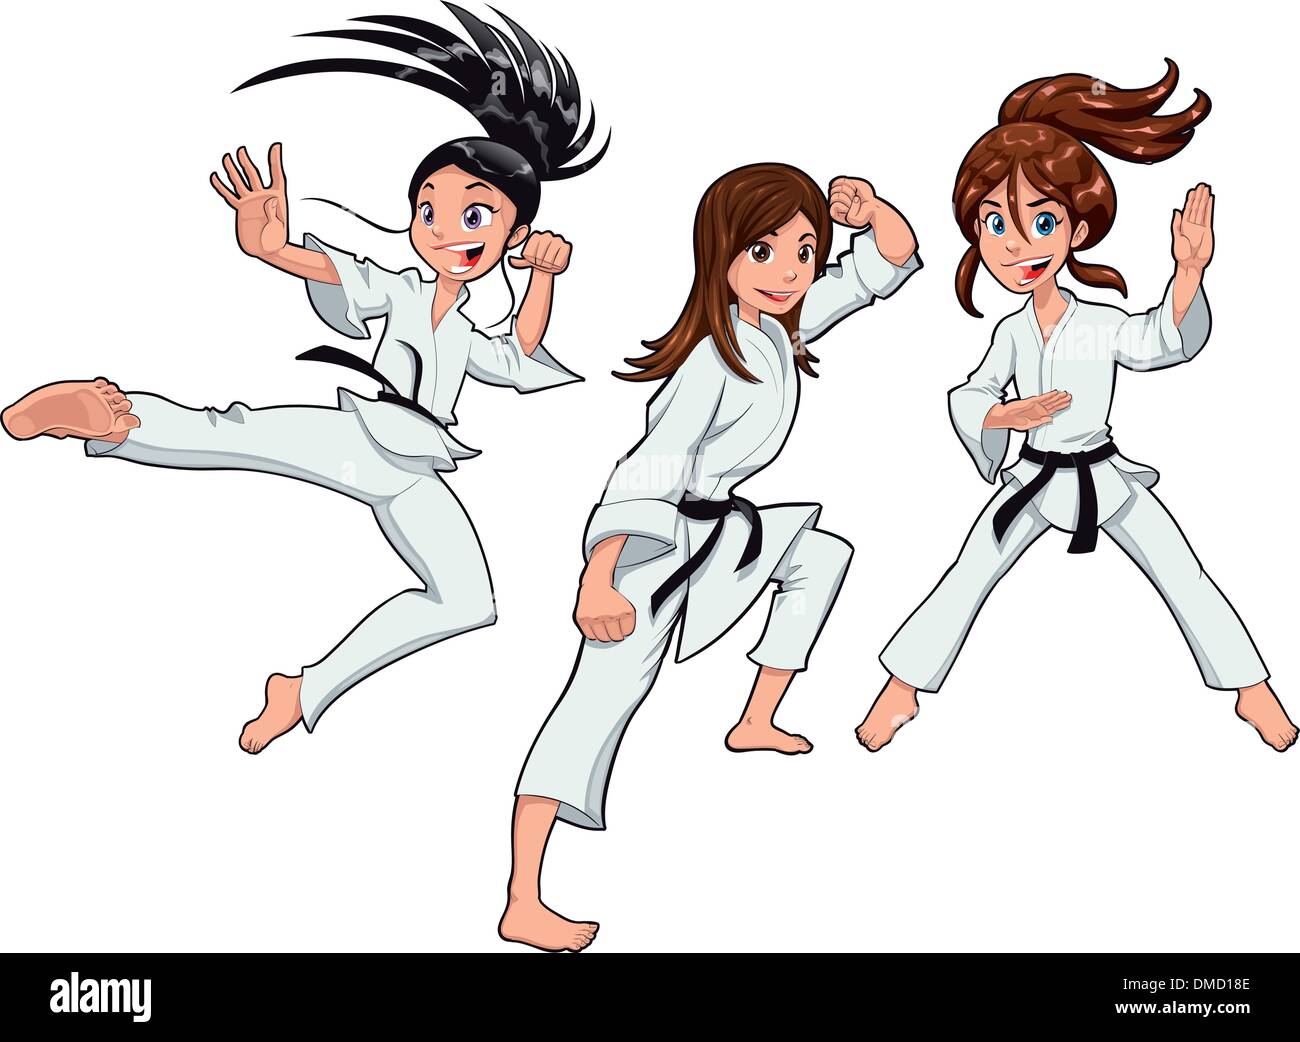 Young girls, Karate Players. Stock Vector